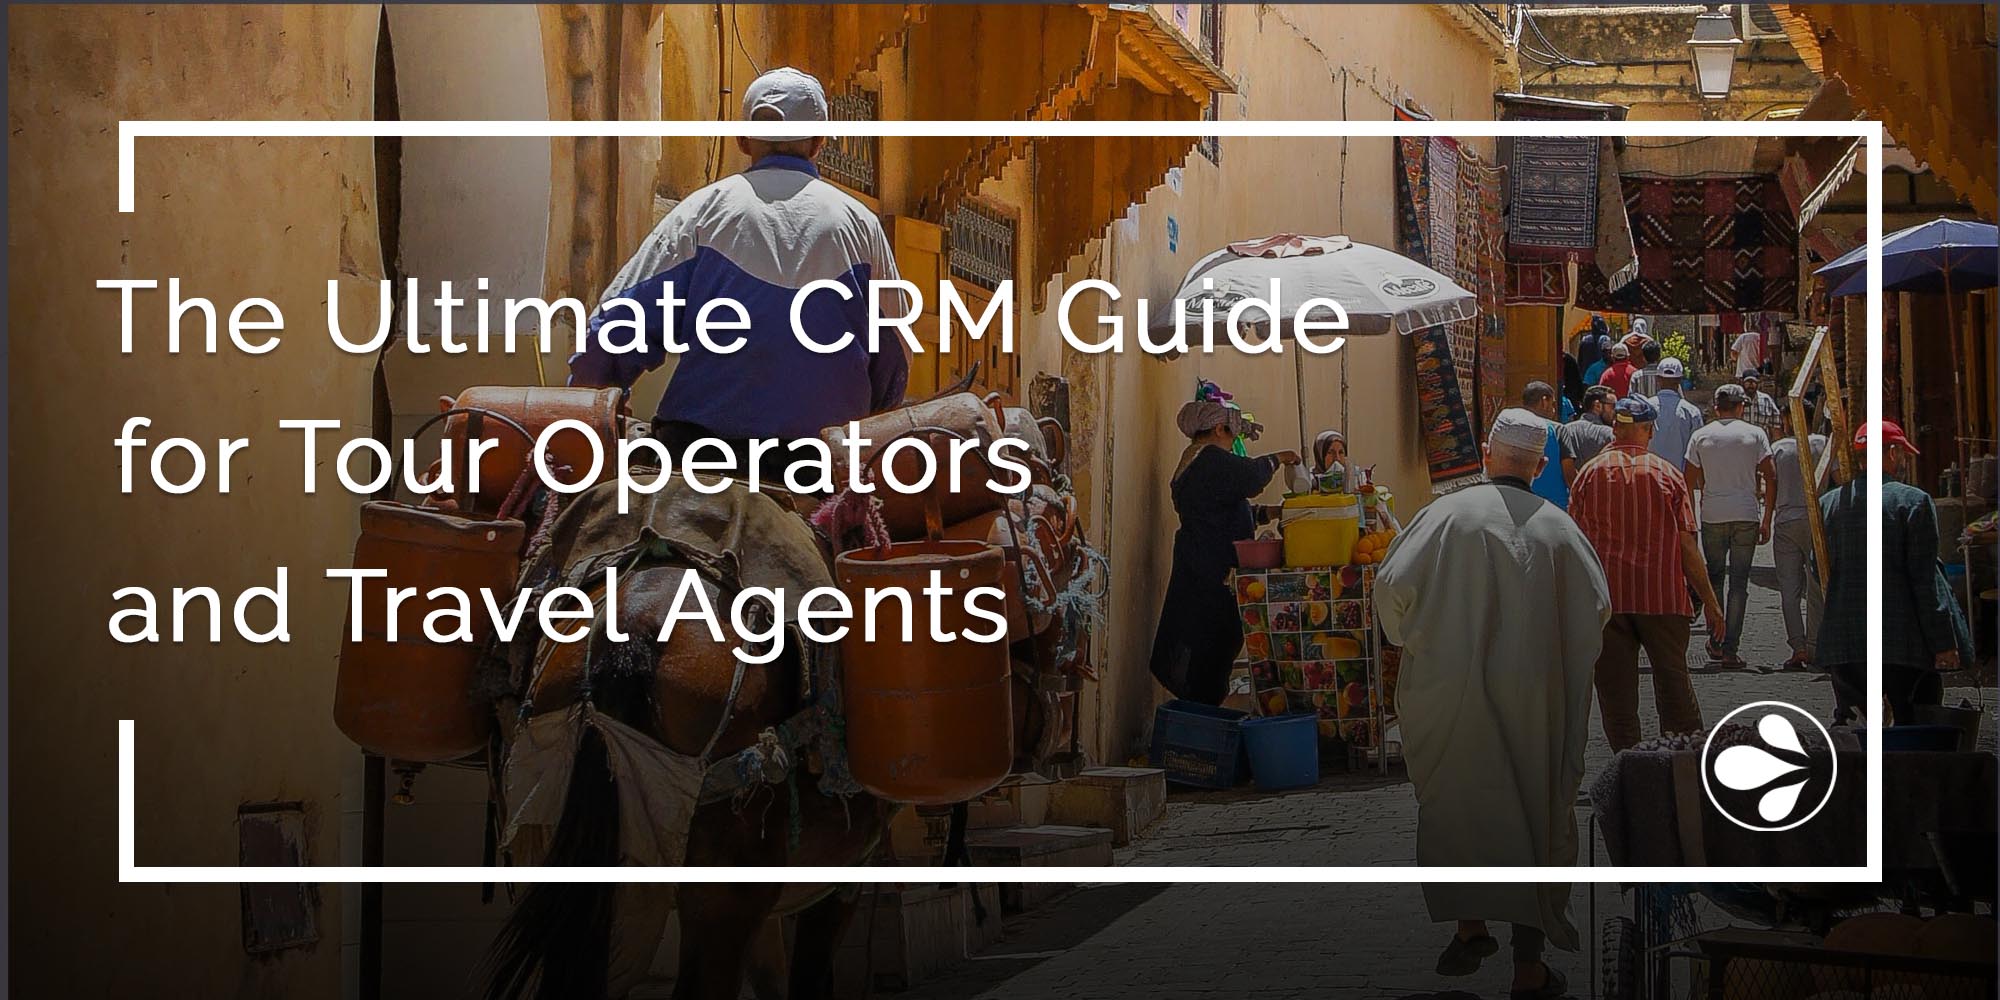 The Ultimate CRM Guide for Tour Operators